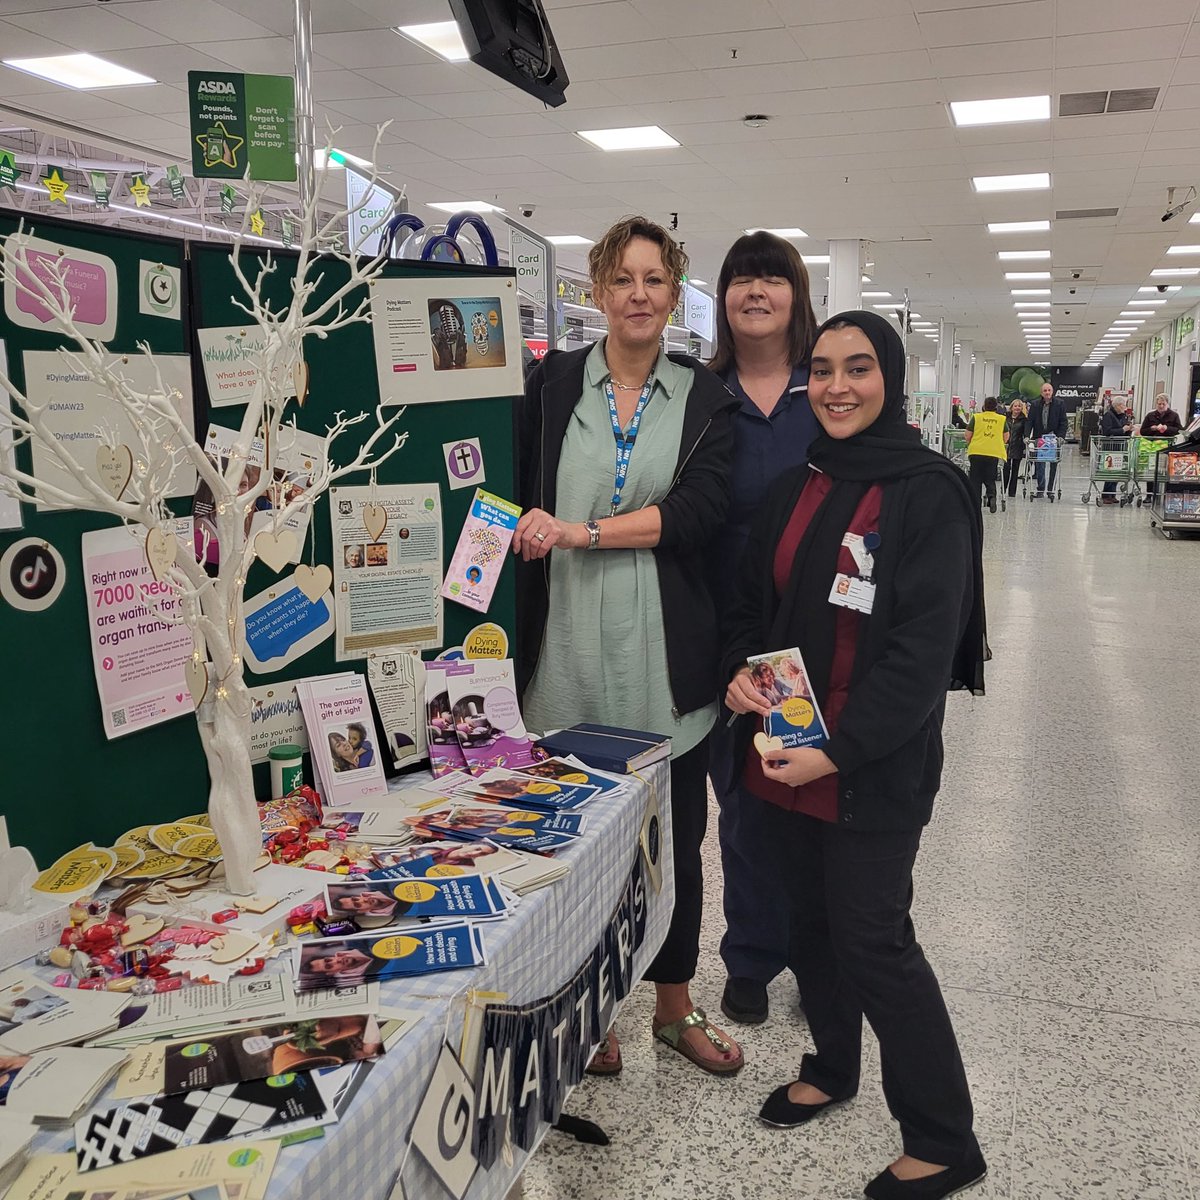 Thank you to Bury Community specialist palliative care team in conjunction with Bury hospice and Adsa Pilsworth supporting Dying Matters awareness week #DyingMattersAwarenessWeek @Wendyparker1992 @davidwthorpe1 @NCAlliance_NHS @BuryCO_NHS @BuryHospice @jacqui_burrow